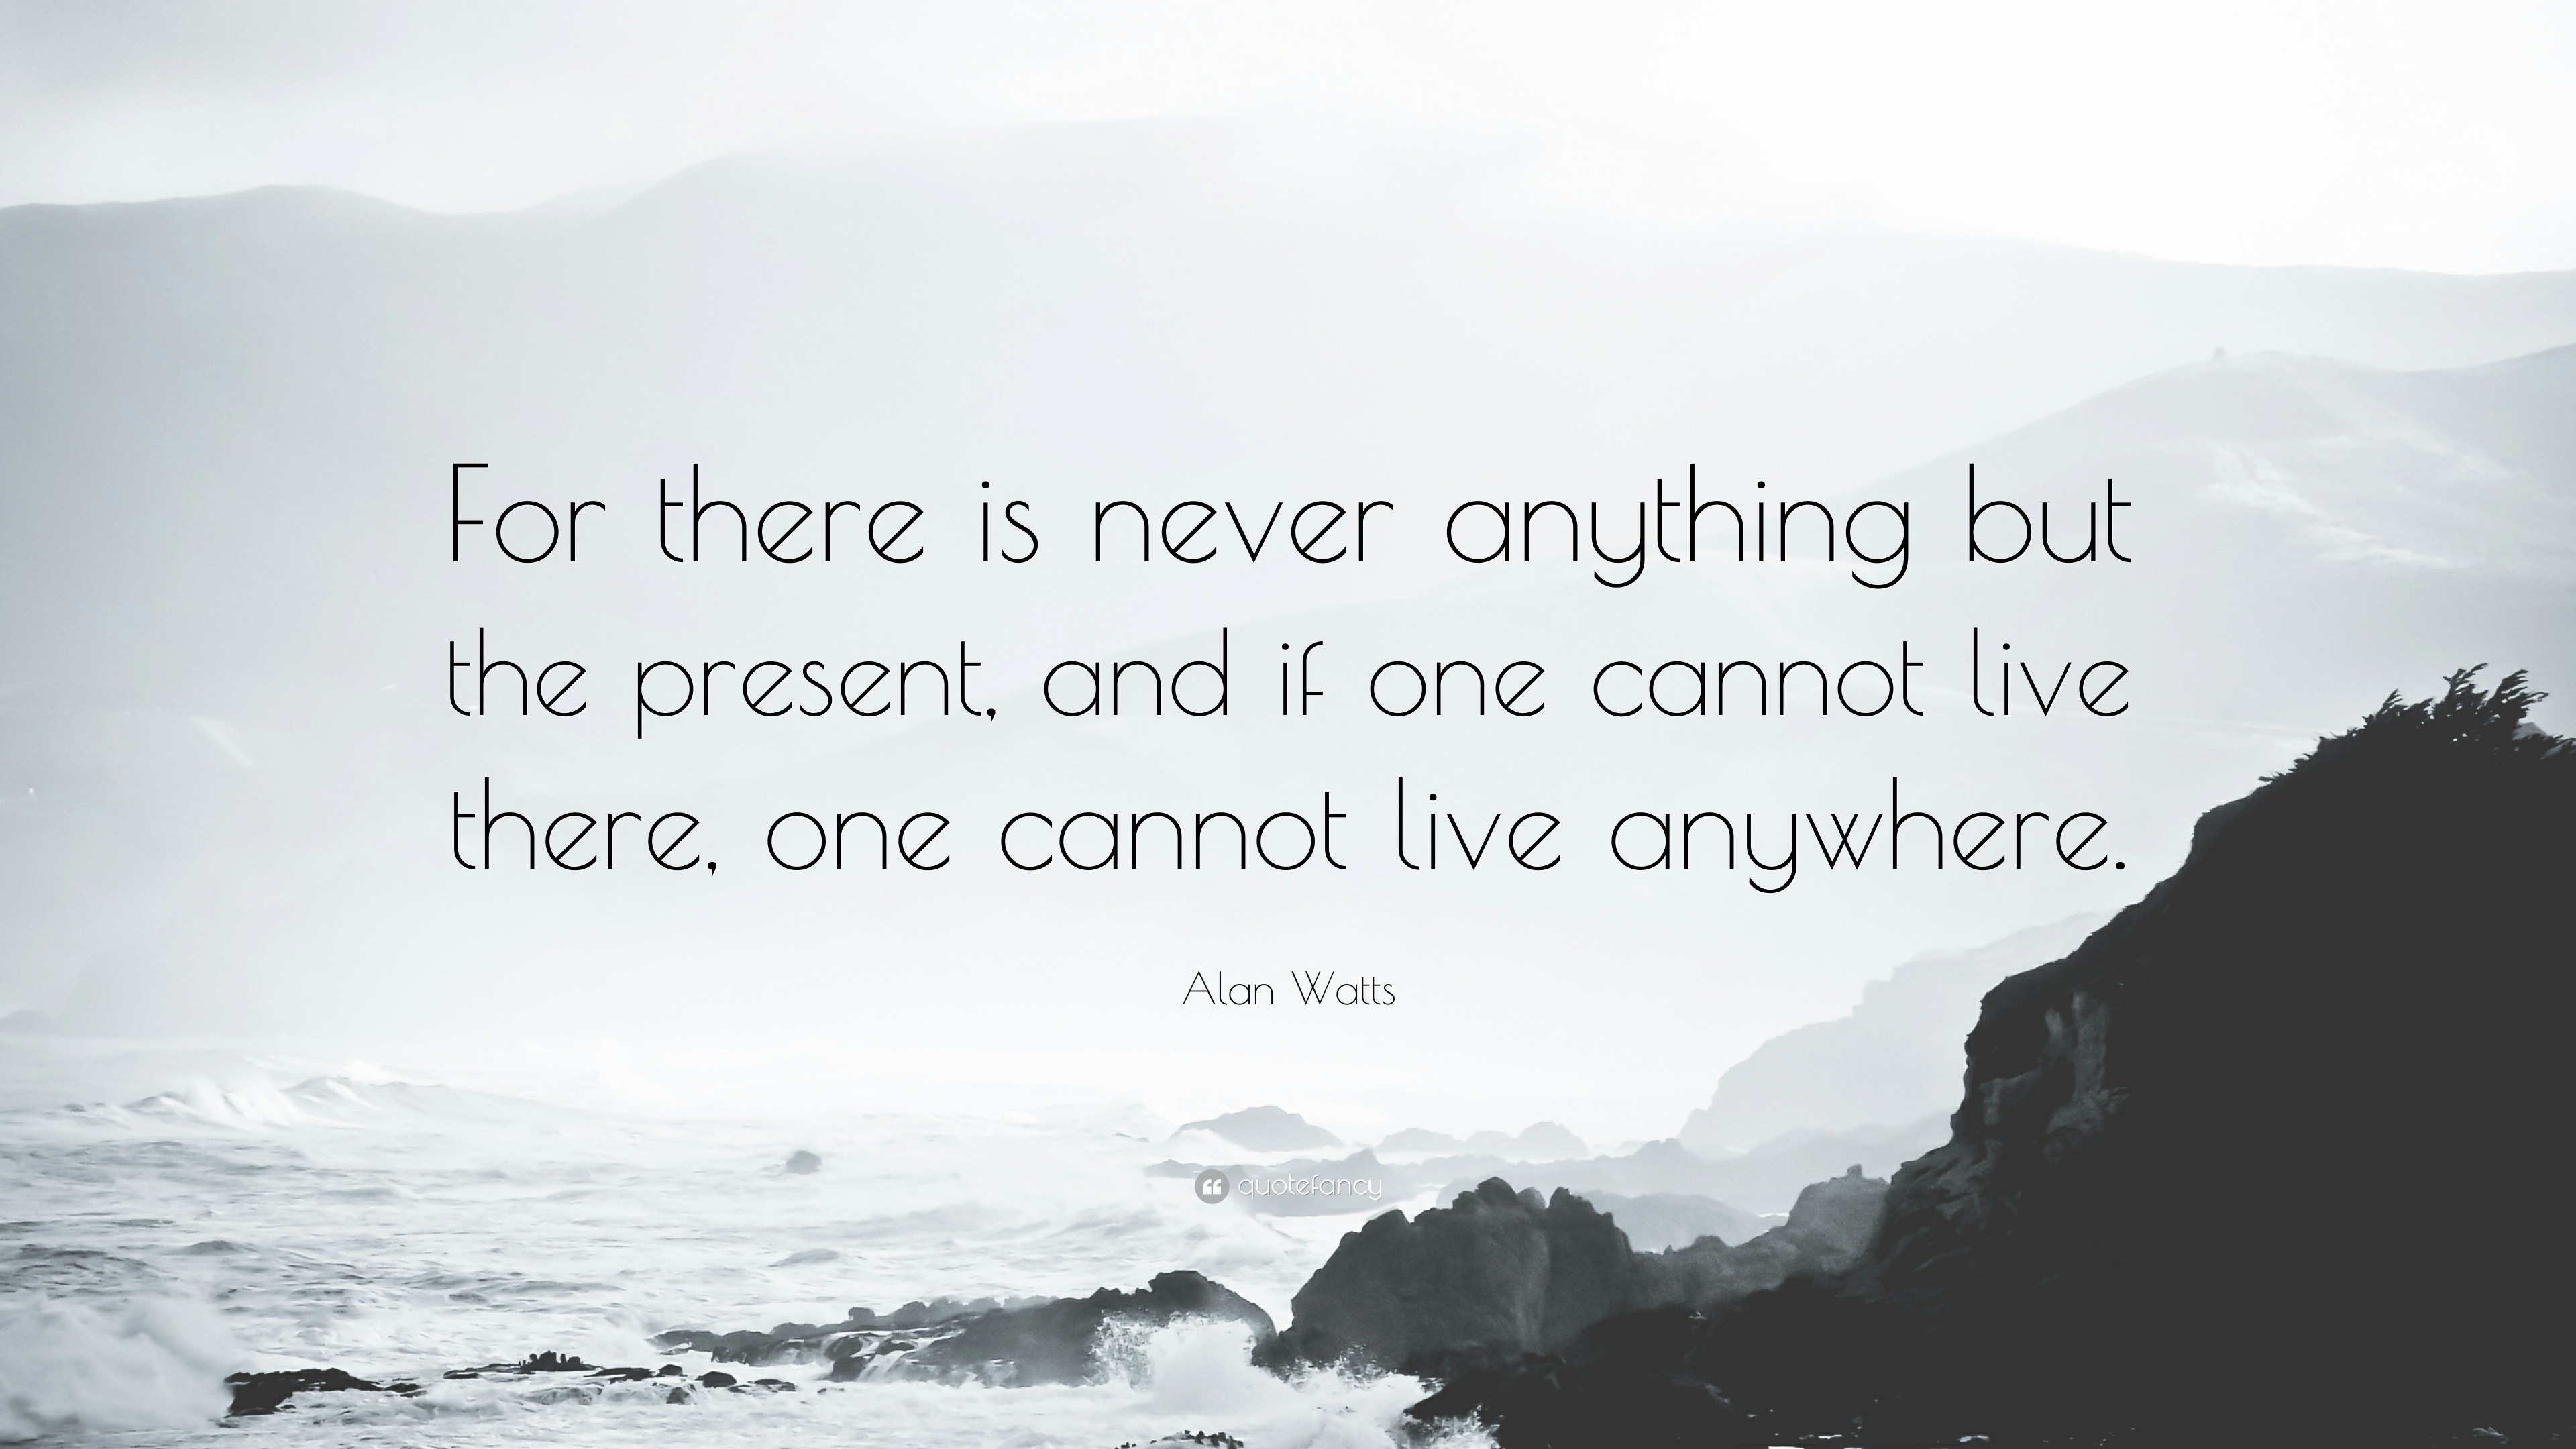 58561 Alan Watts Quote For there is never anything but the present and